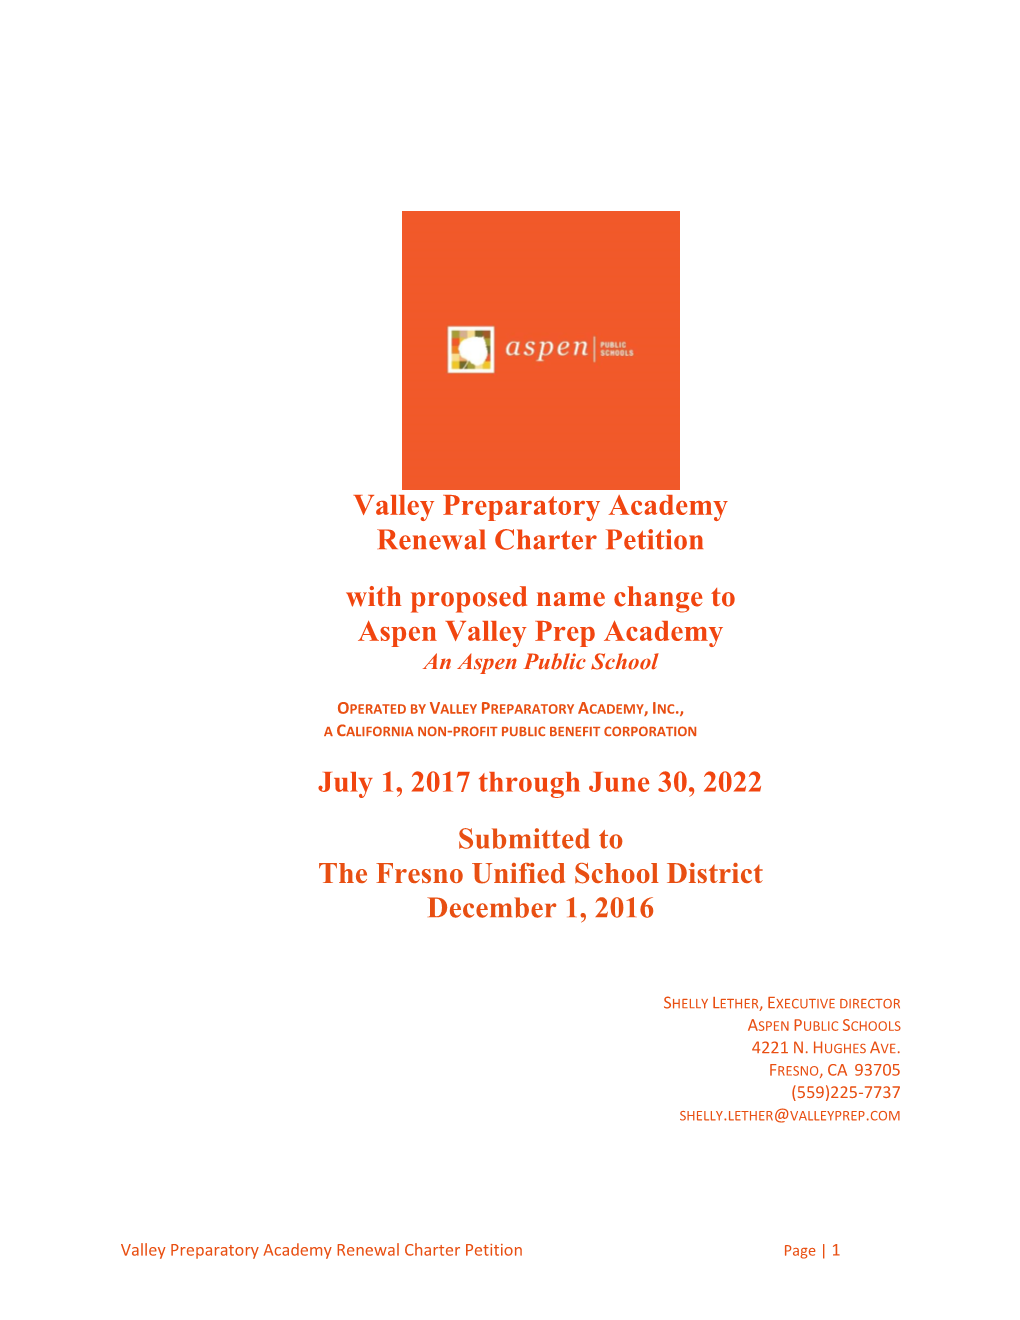 Valley Preparatory Academy Renewal Charter Petition with Proposed